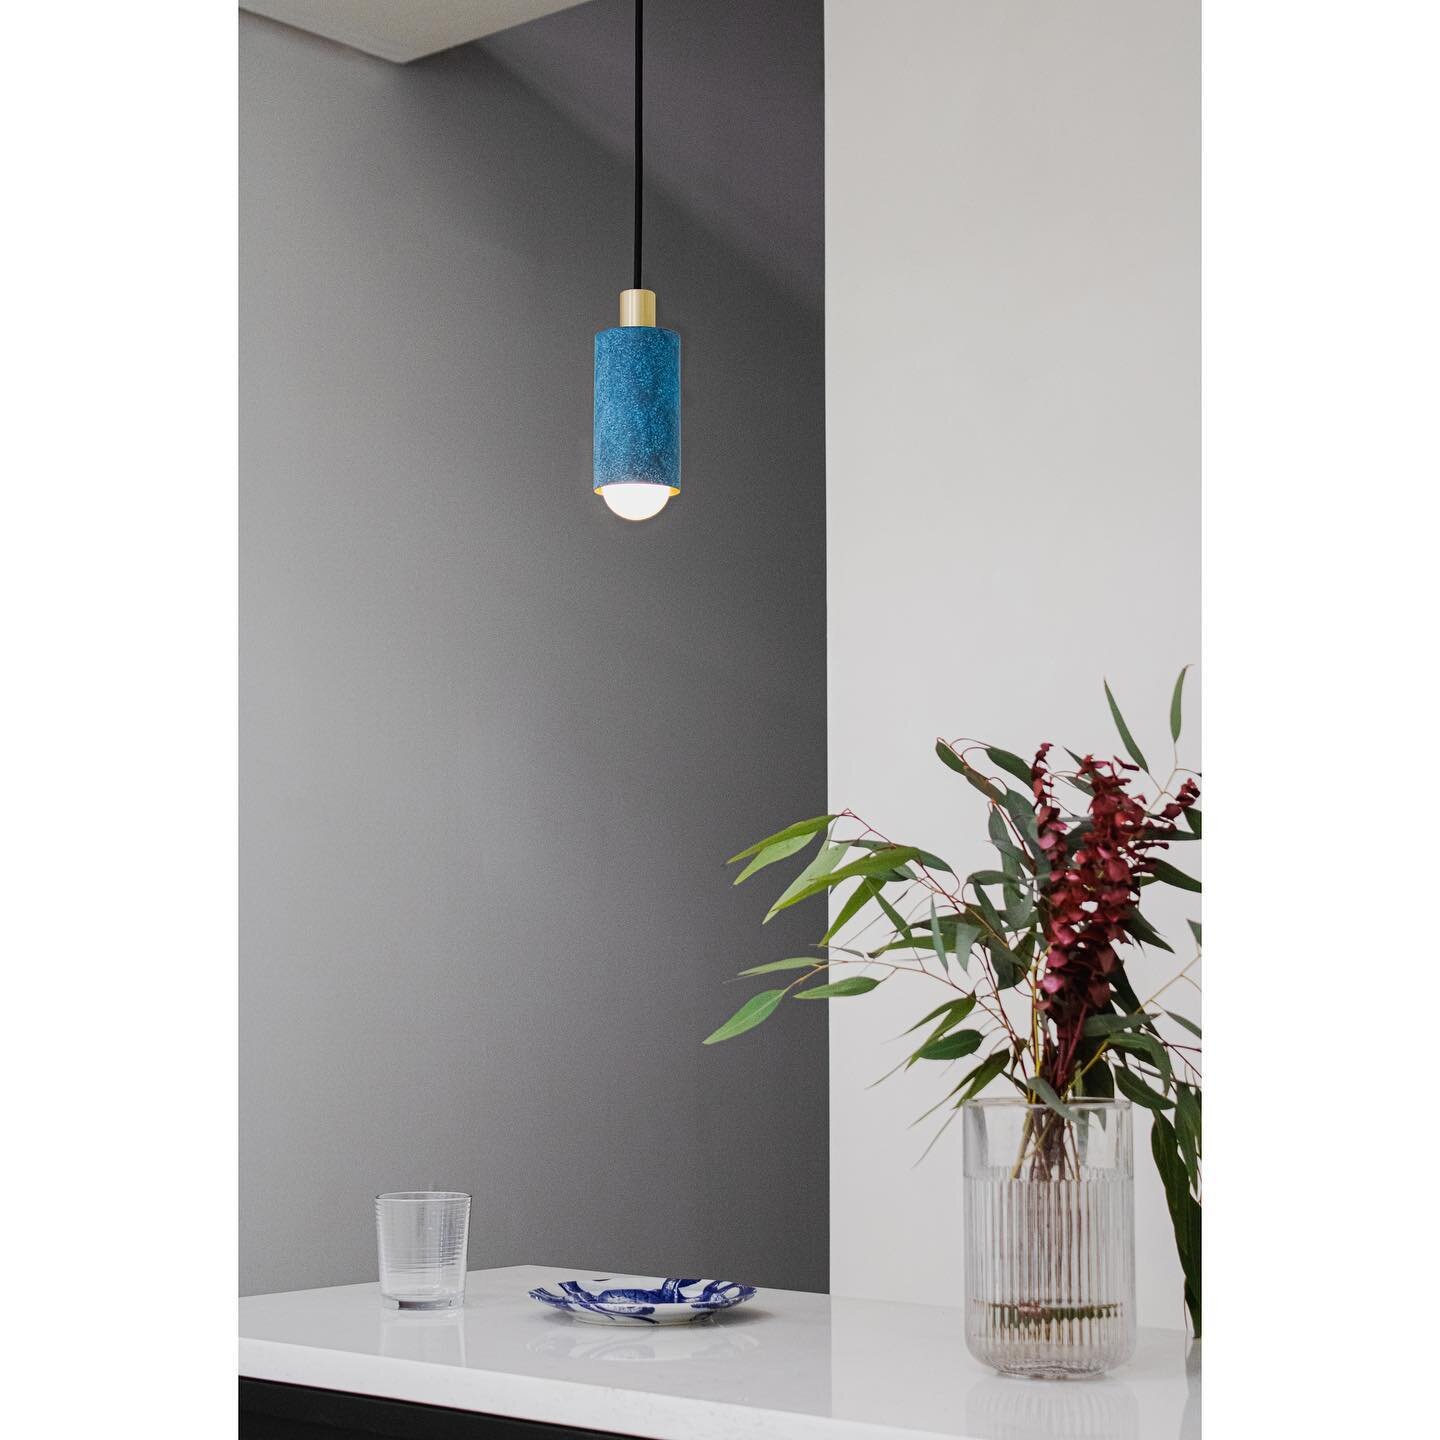 Our new Louise pendant in Trella&rsquo;s signature Prussian Blue patina. Now available for purchase on our new online store. Link in bio.

#trella #trellastudio #pendantlight #pendant #lighting #interiorlighting #barlighting #resturantlighting #homel